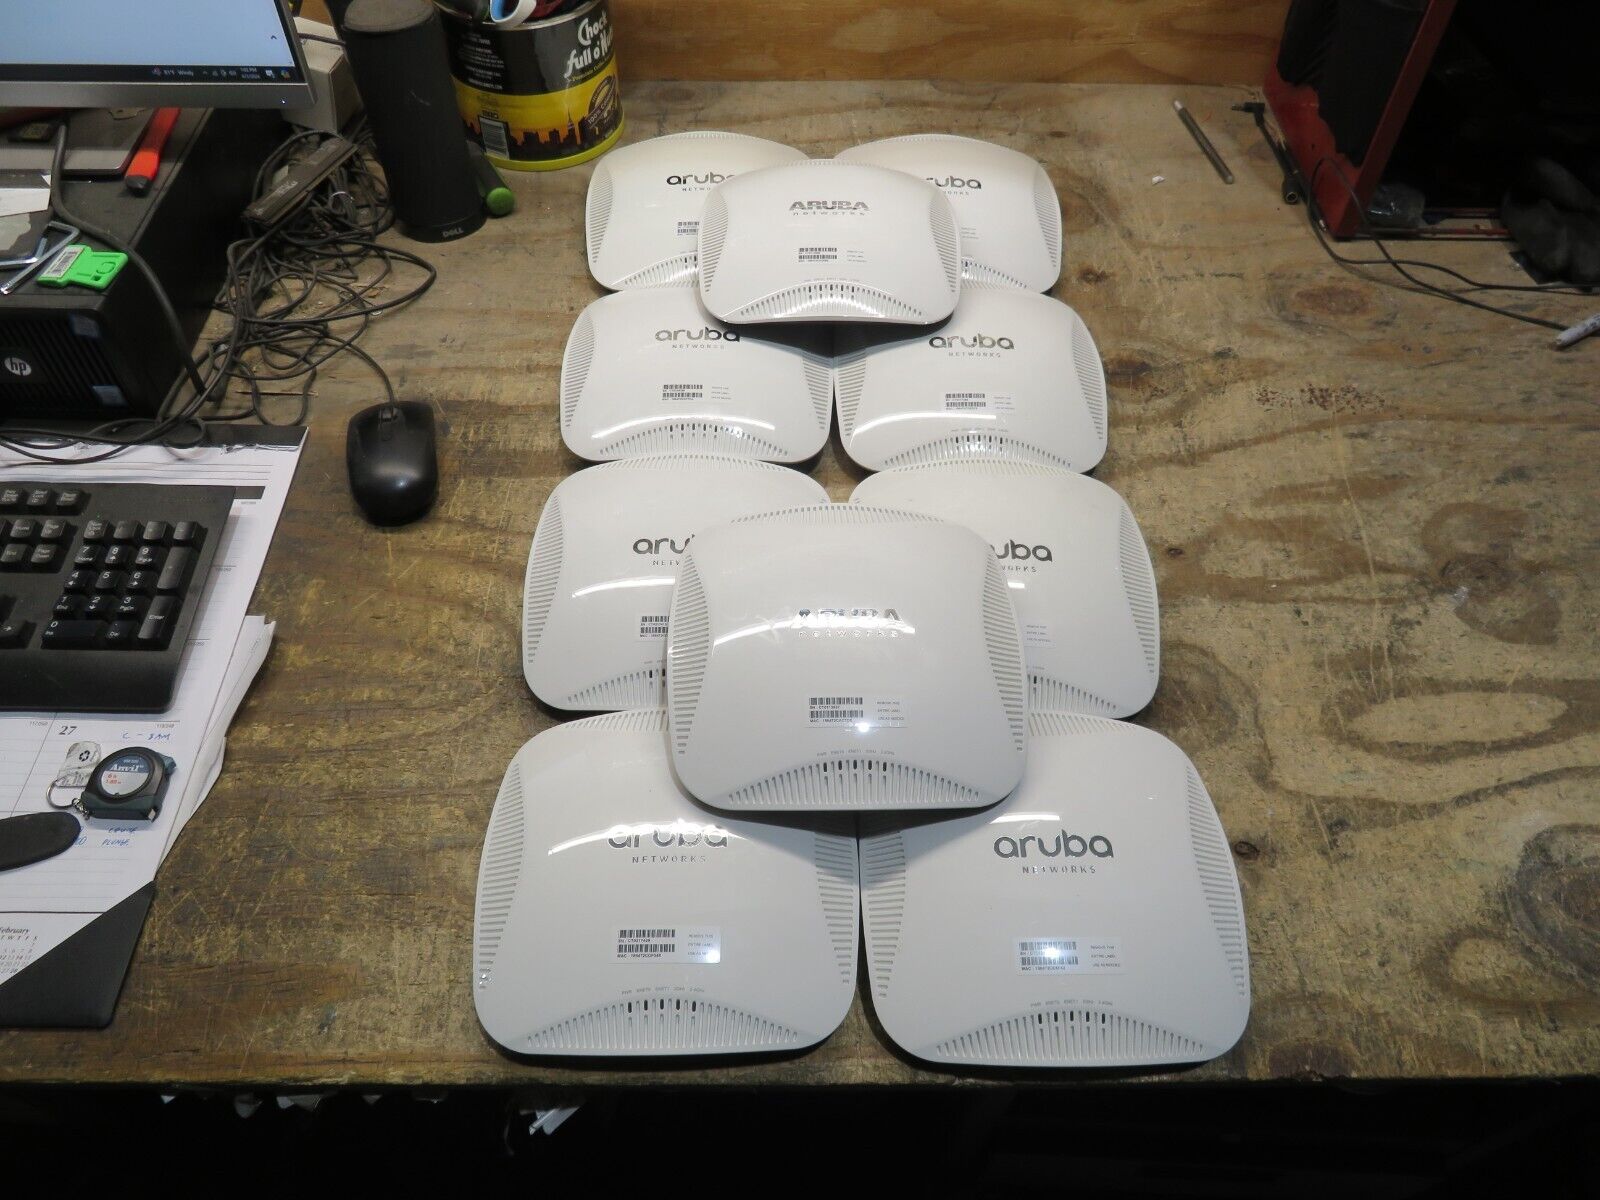 LOT OF 10 Aruba Networks AP-225-US Access Point APIN0225 ( NO ACCESSORIES )